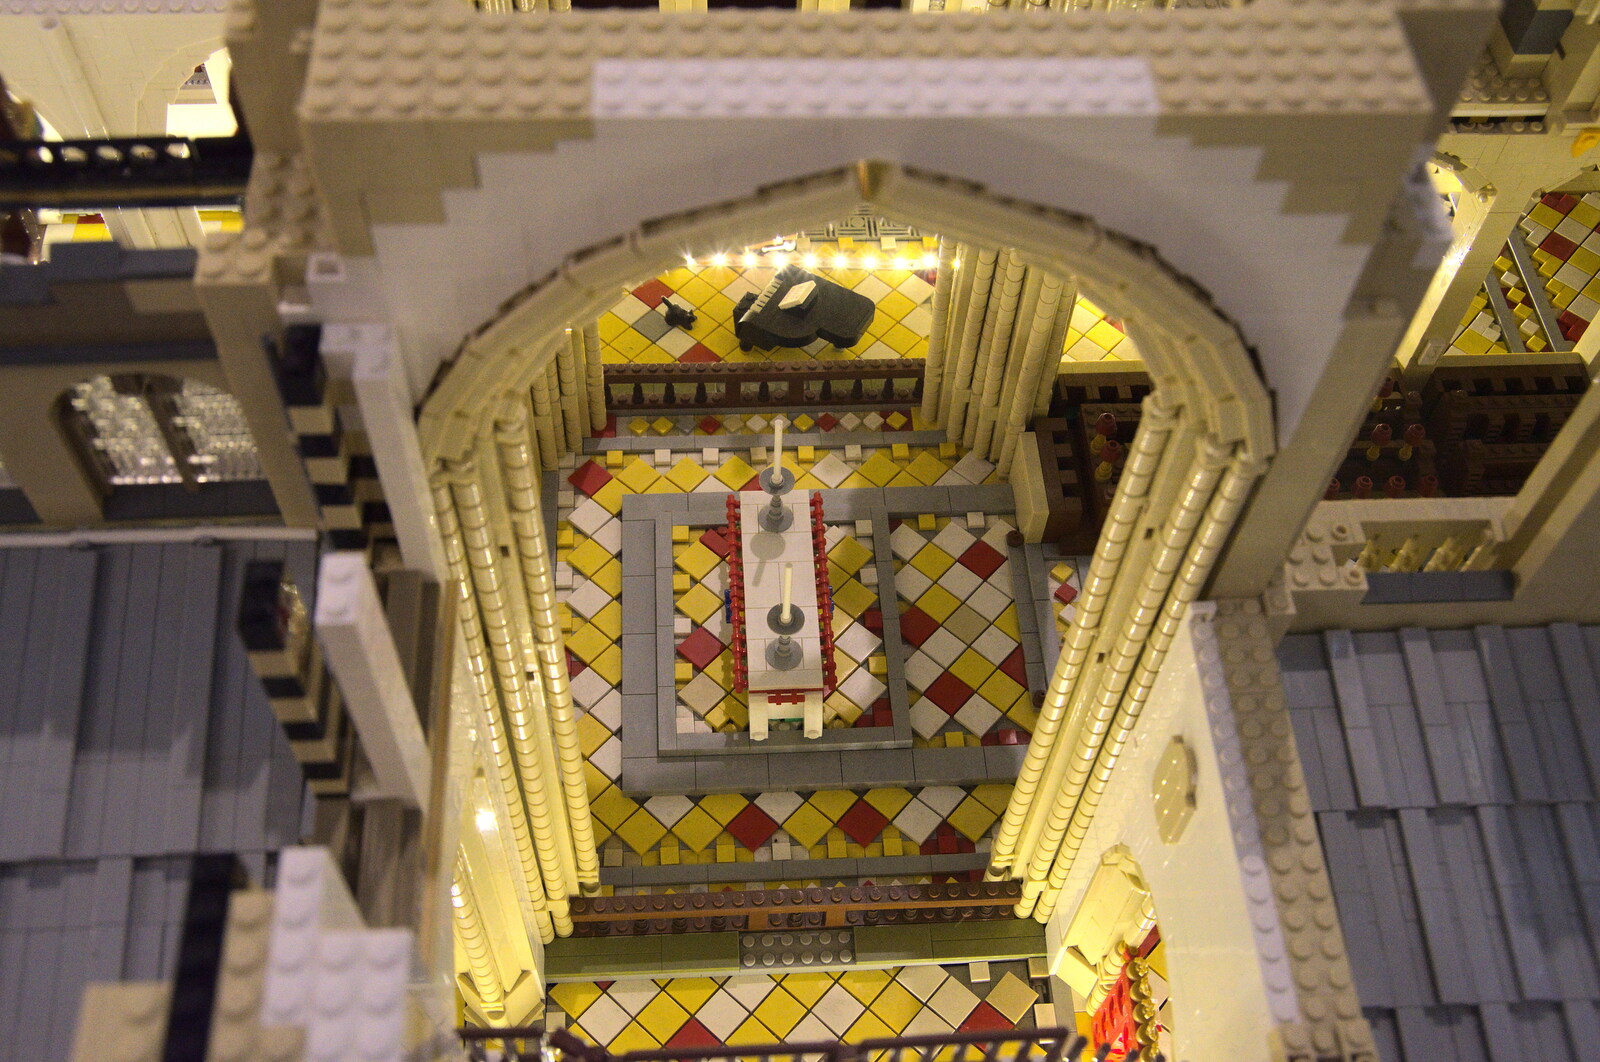 Pizza and Pasta in Bury St. Edmunds, Suffolk - 30th October 2022: There's a cat and a piano in the Lego cathedral